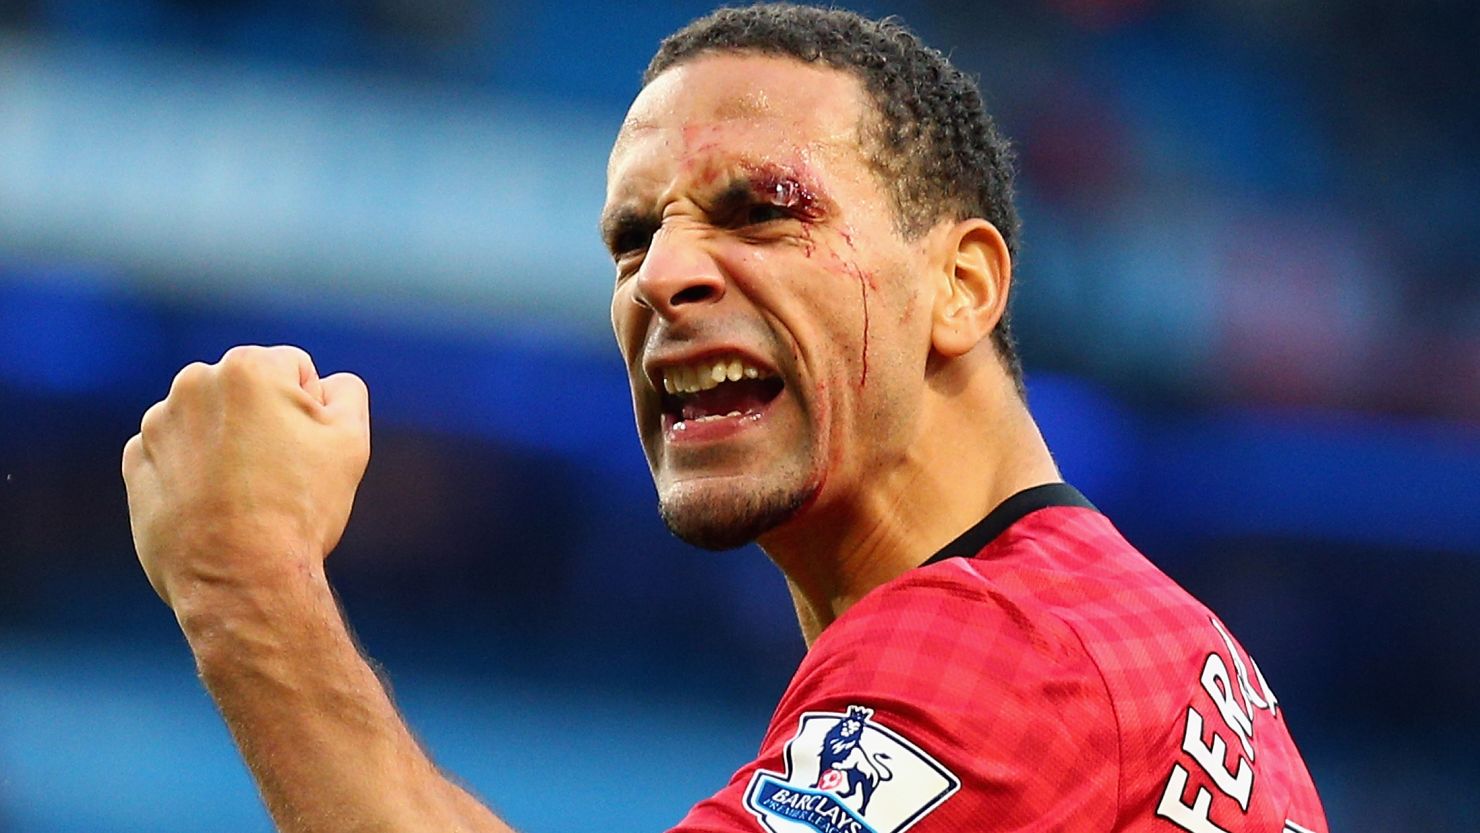 Manchester United defender Rio Ferdinand has represented England 81 times, but not since June 2011.